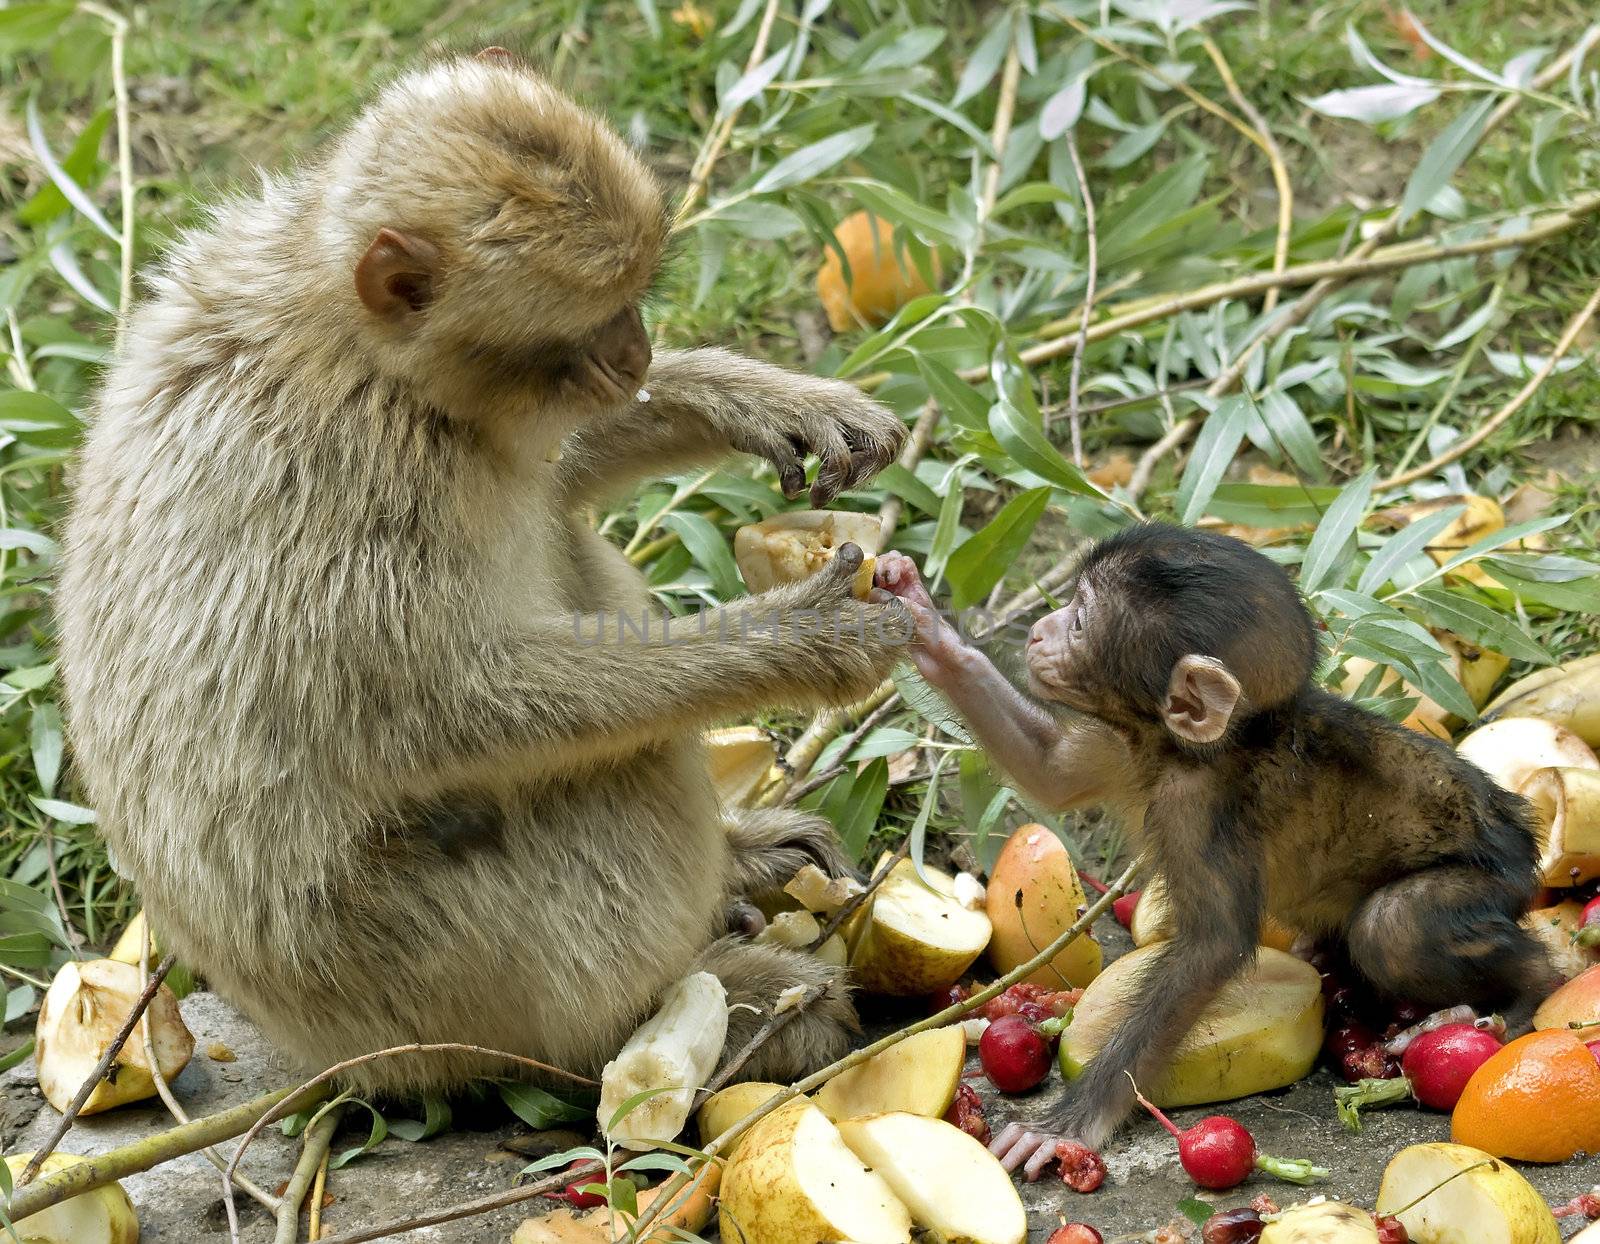 A mother monkey giving food to baby by AlessandroZocc